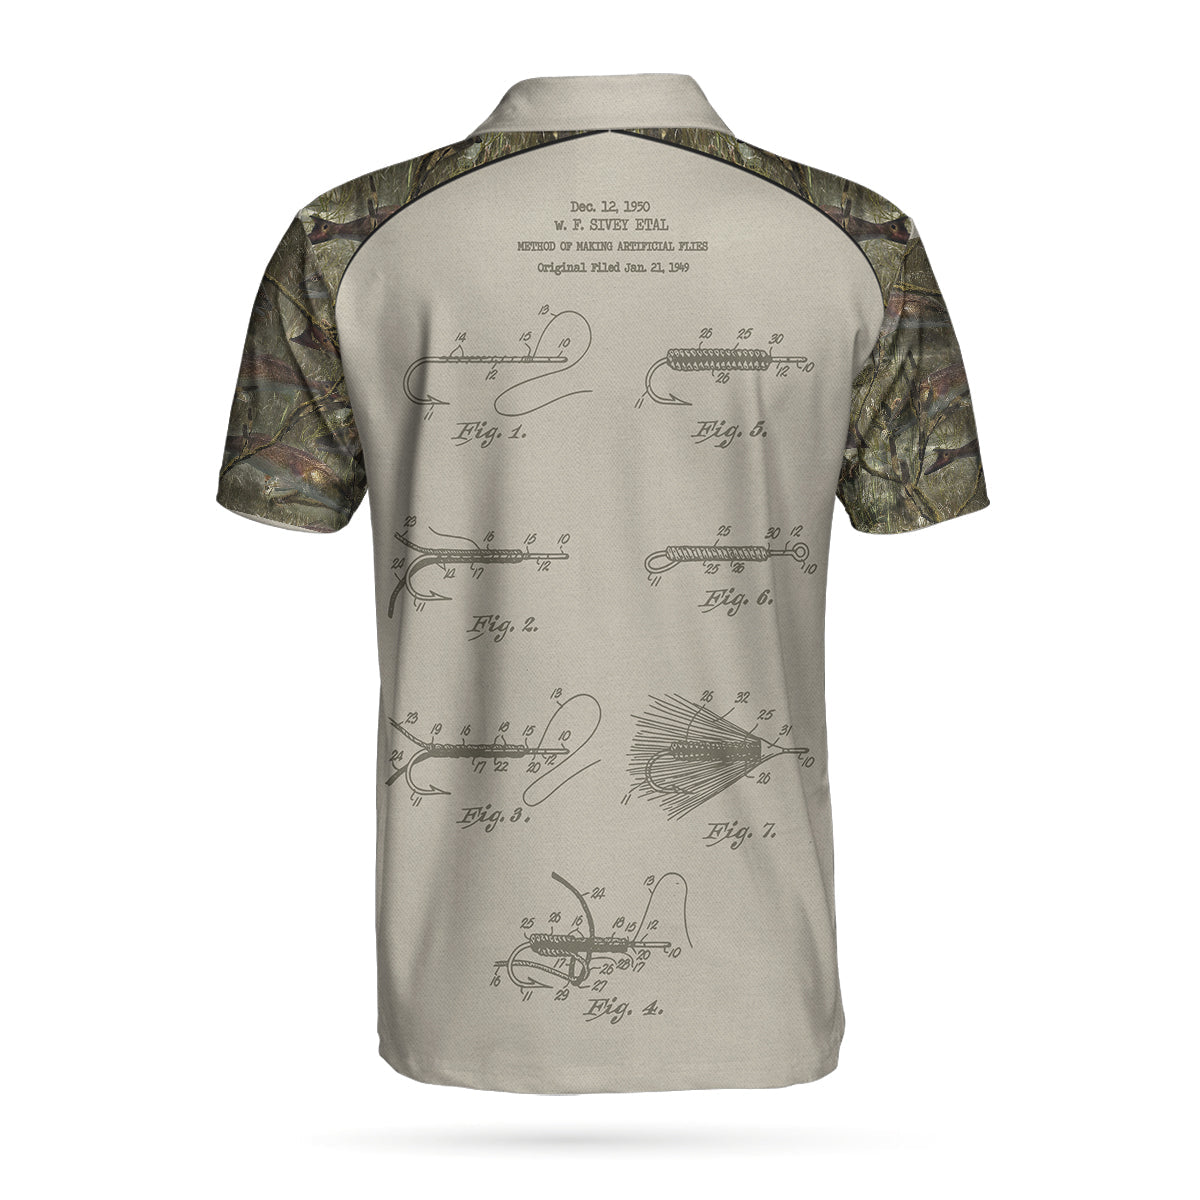 Fly Fishing On The Fly Flies Patent Polo Shirt, Fly Hook Camouflage Polo Shirt, Camo Fishing Shirt for Men